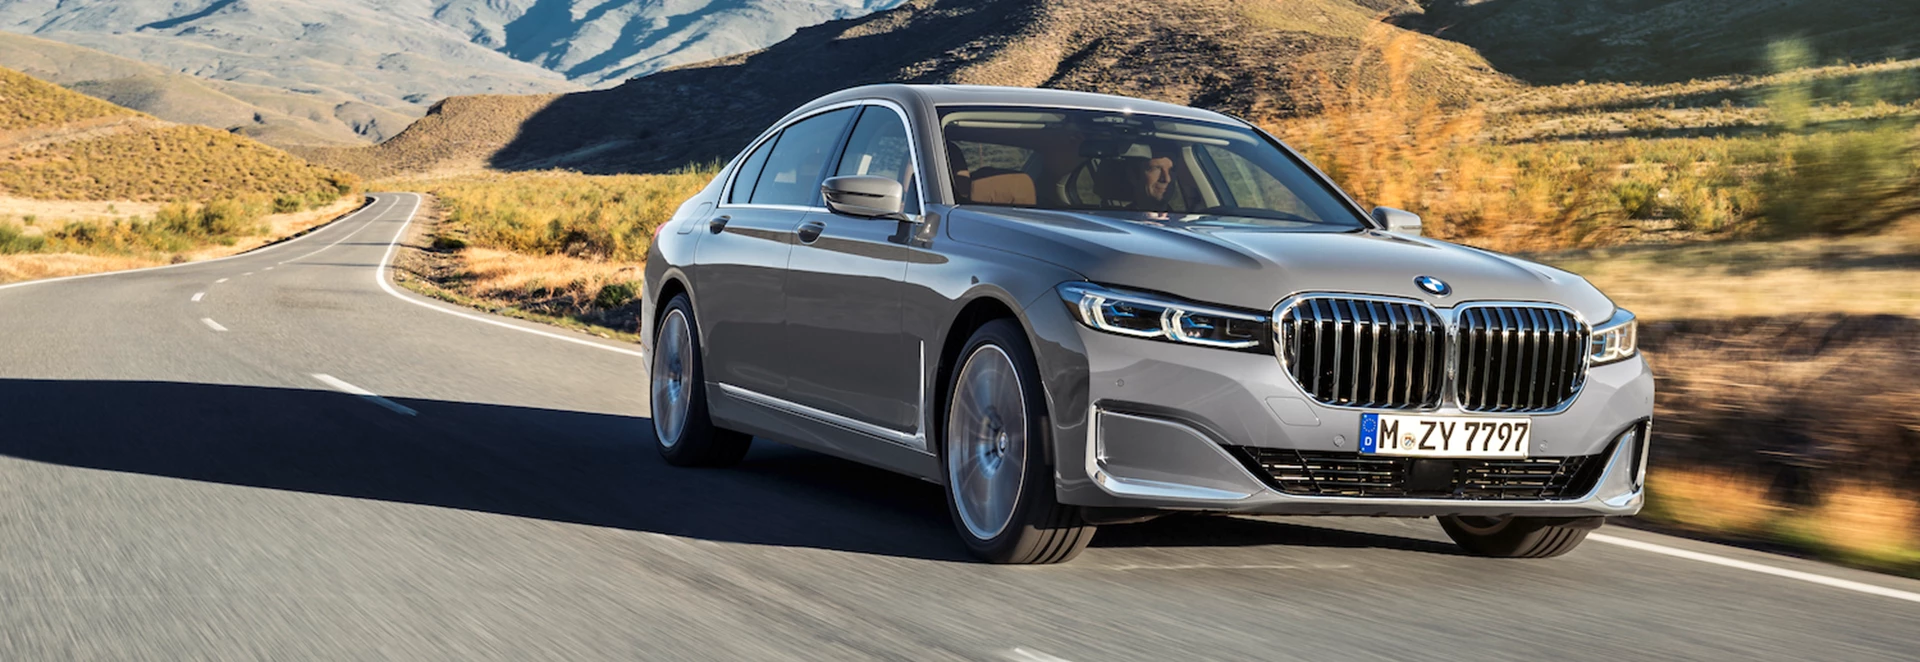 Updated BMW 7 Series unveiled 